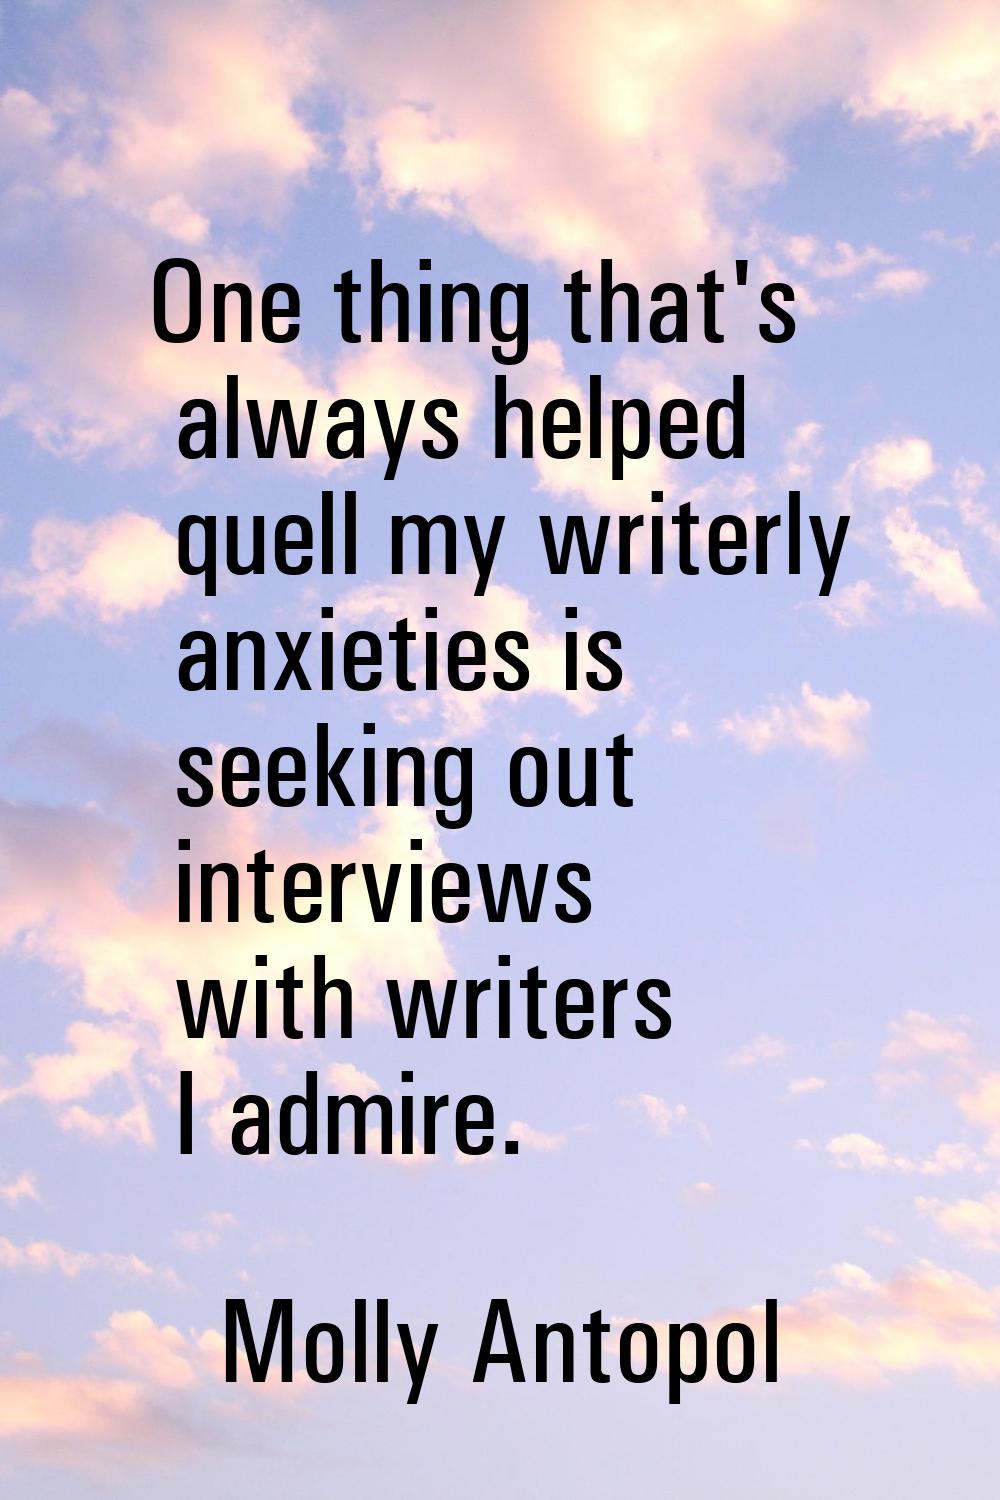 One thing that's always helped quell my writerly anxieties is seeking out interviews with writers I